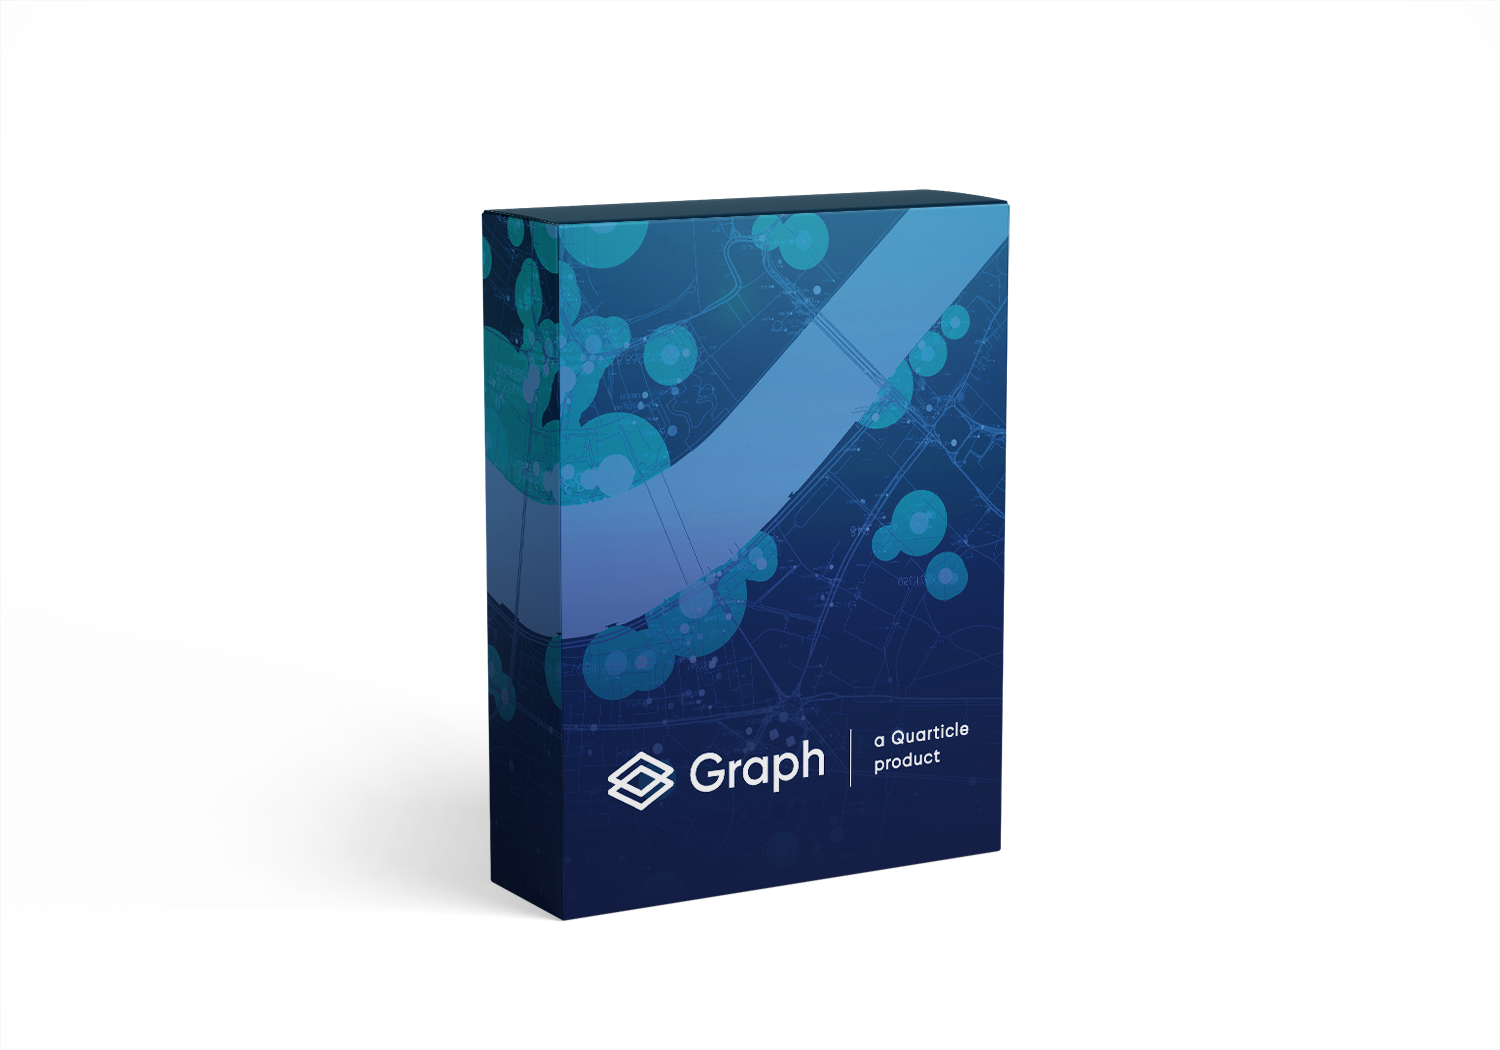 Map visualizer software product box 